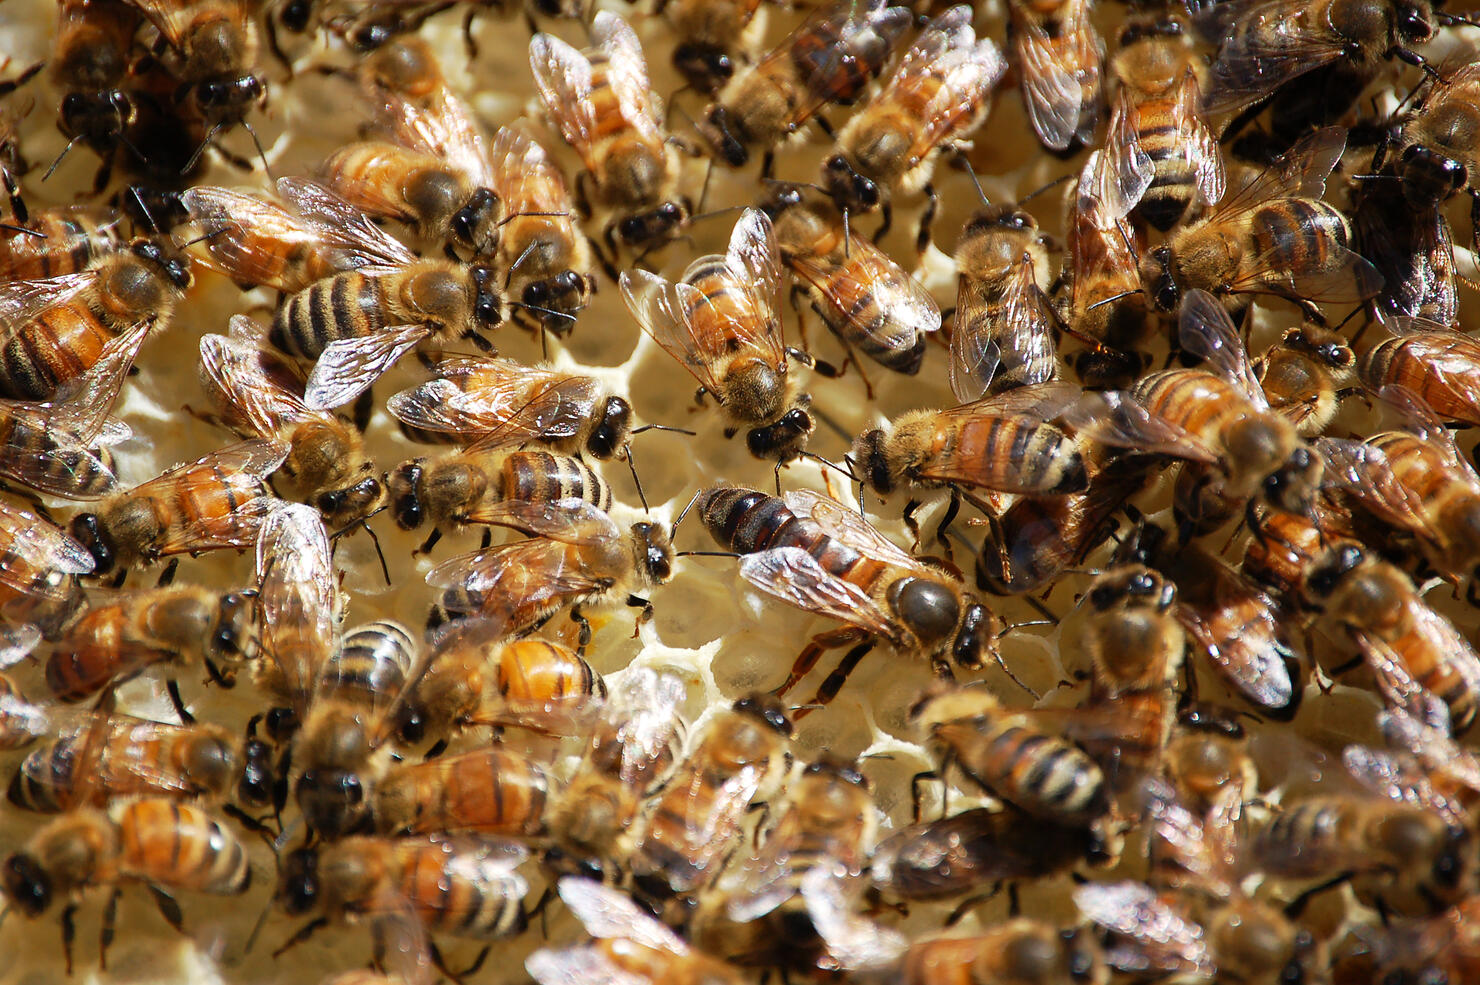 Inside the hive,Close-up of bees on honeycomb